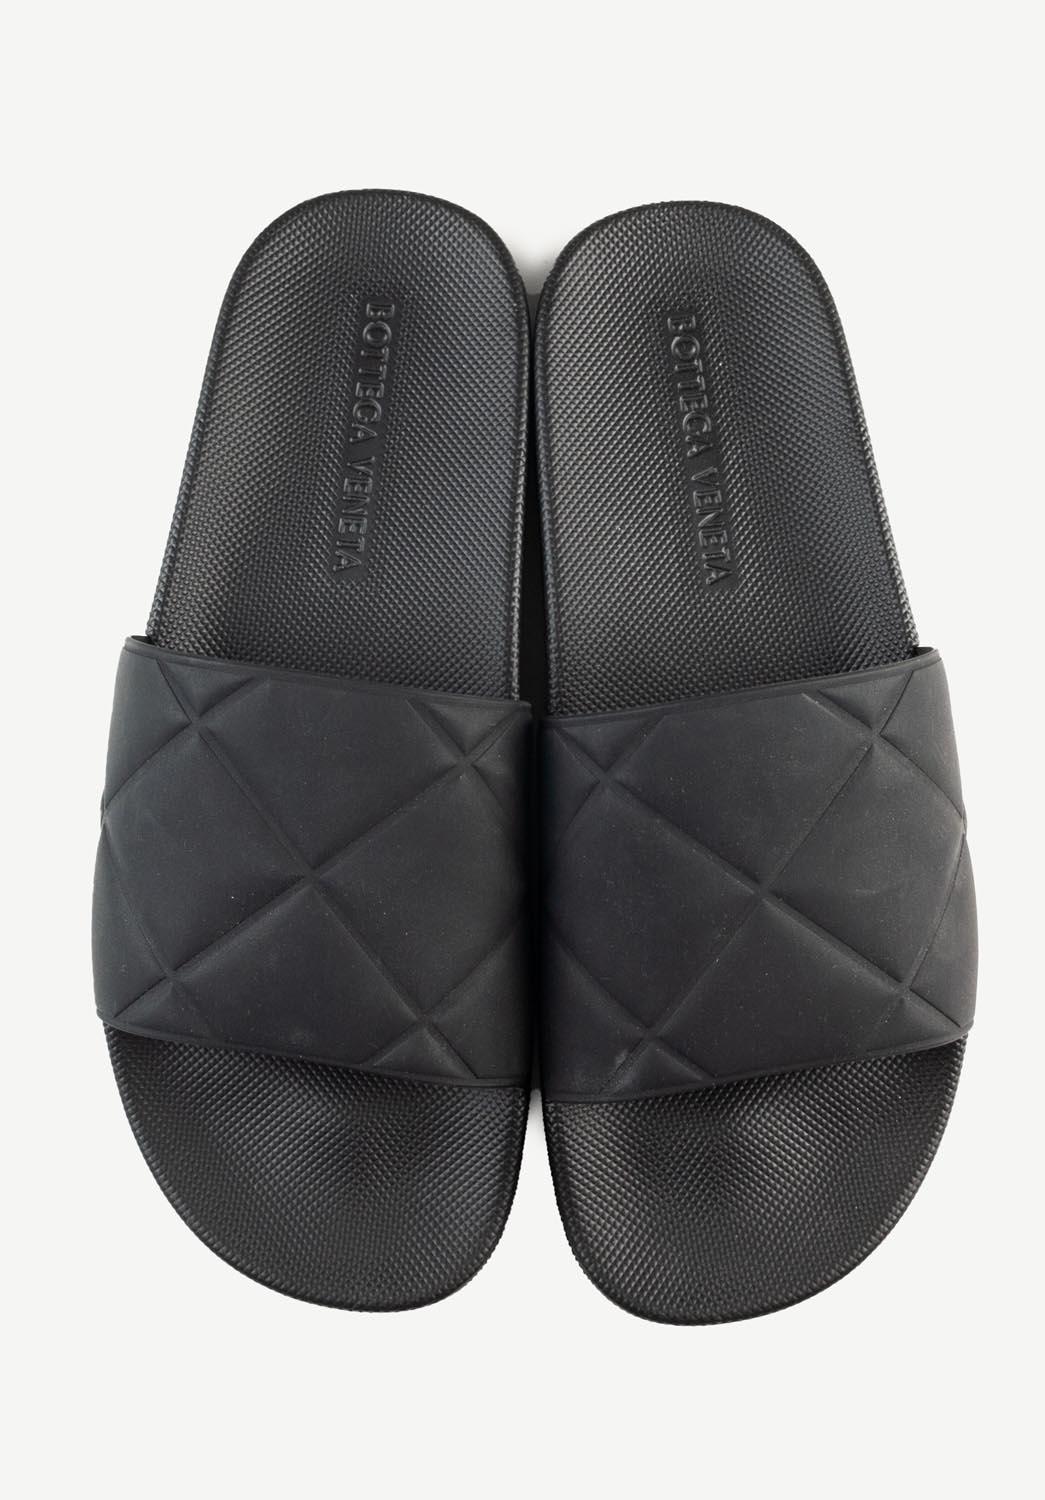 100% genuine Bottega Veneta Men Slippers, Nocode
Color: black
(An actual color may a bit vary due to individual computer screen interpretation)
Material: rubber
Tag size: EUR40, USA7, UK6
These shoes are great quality item. Rate 10 of 10, new with